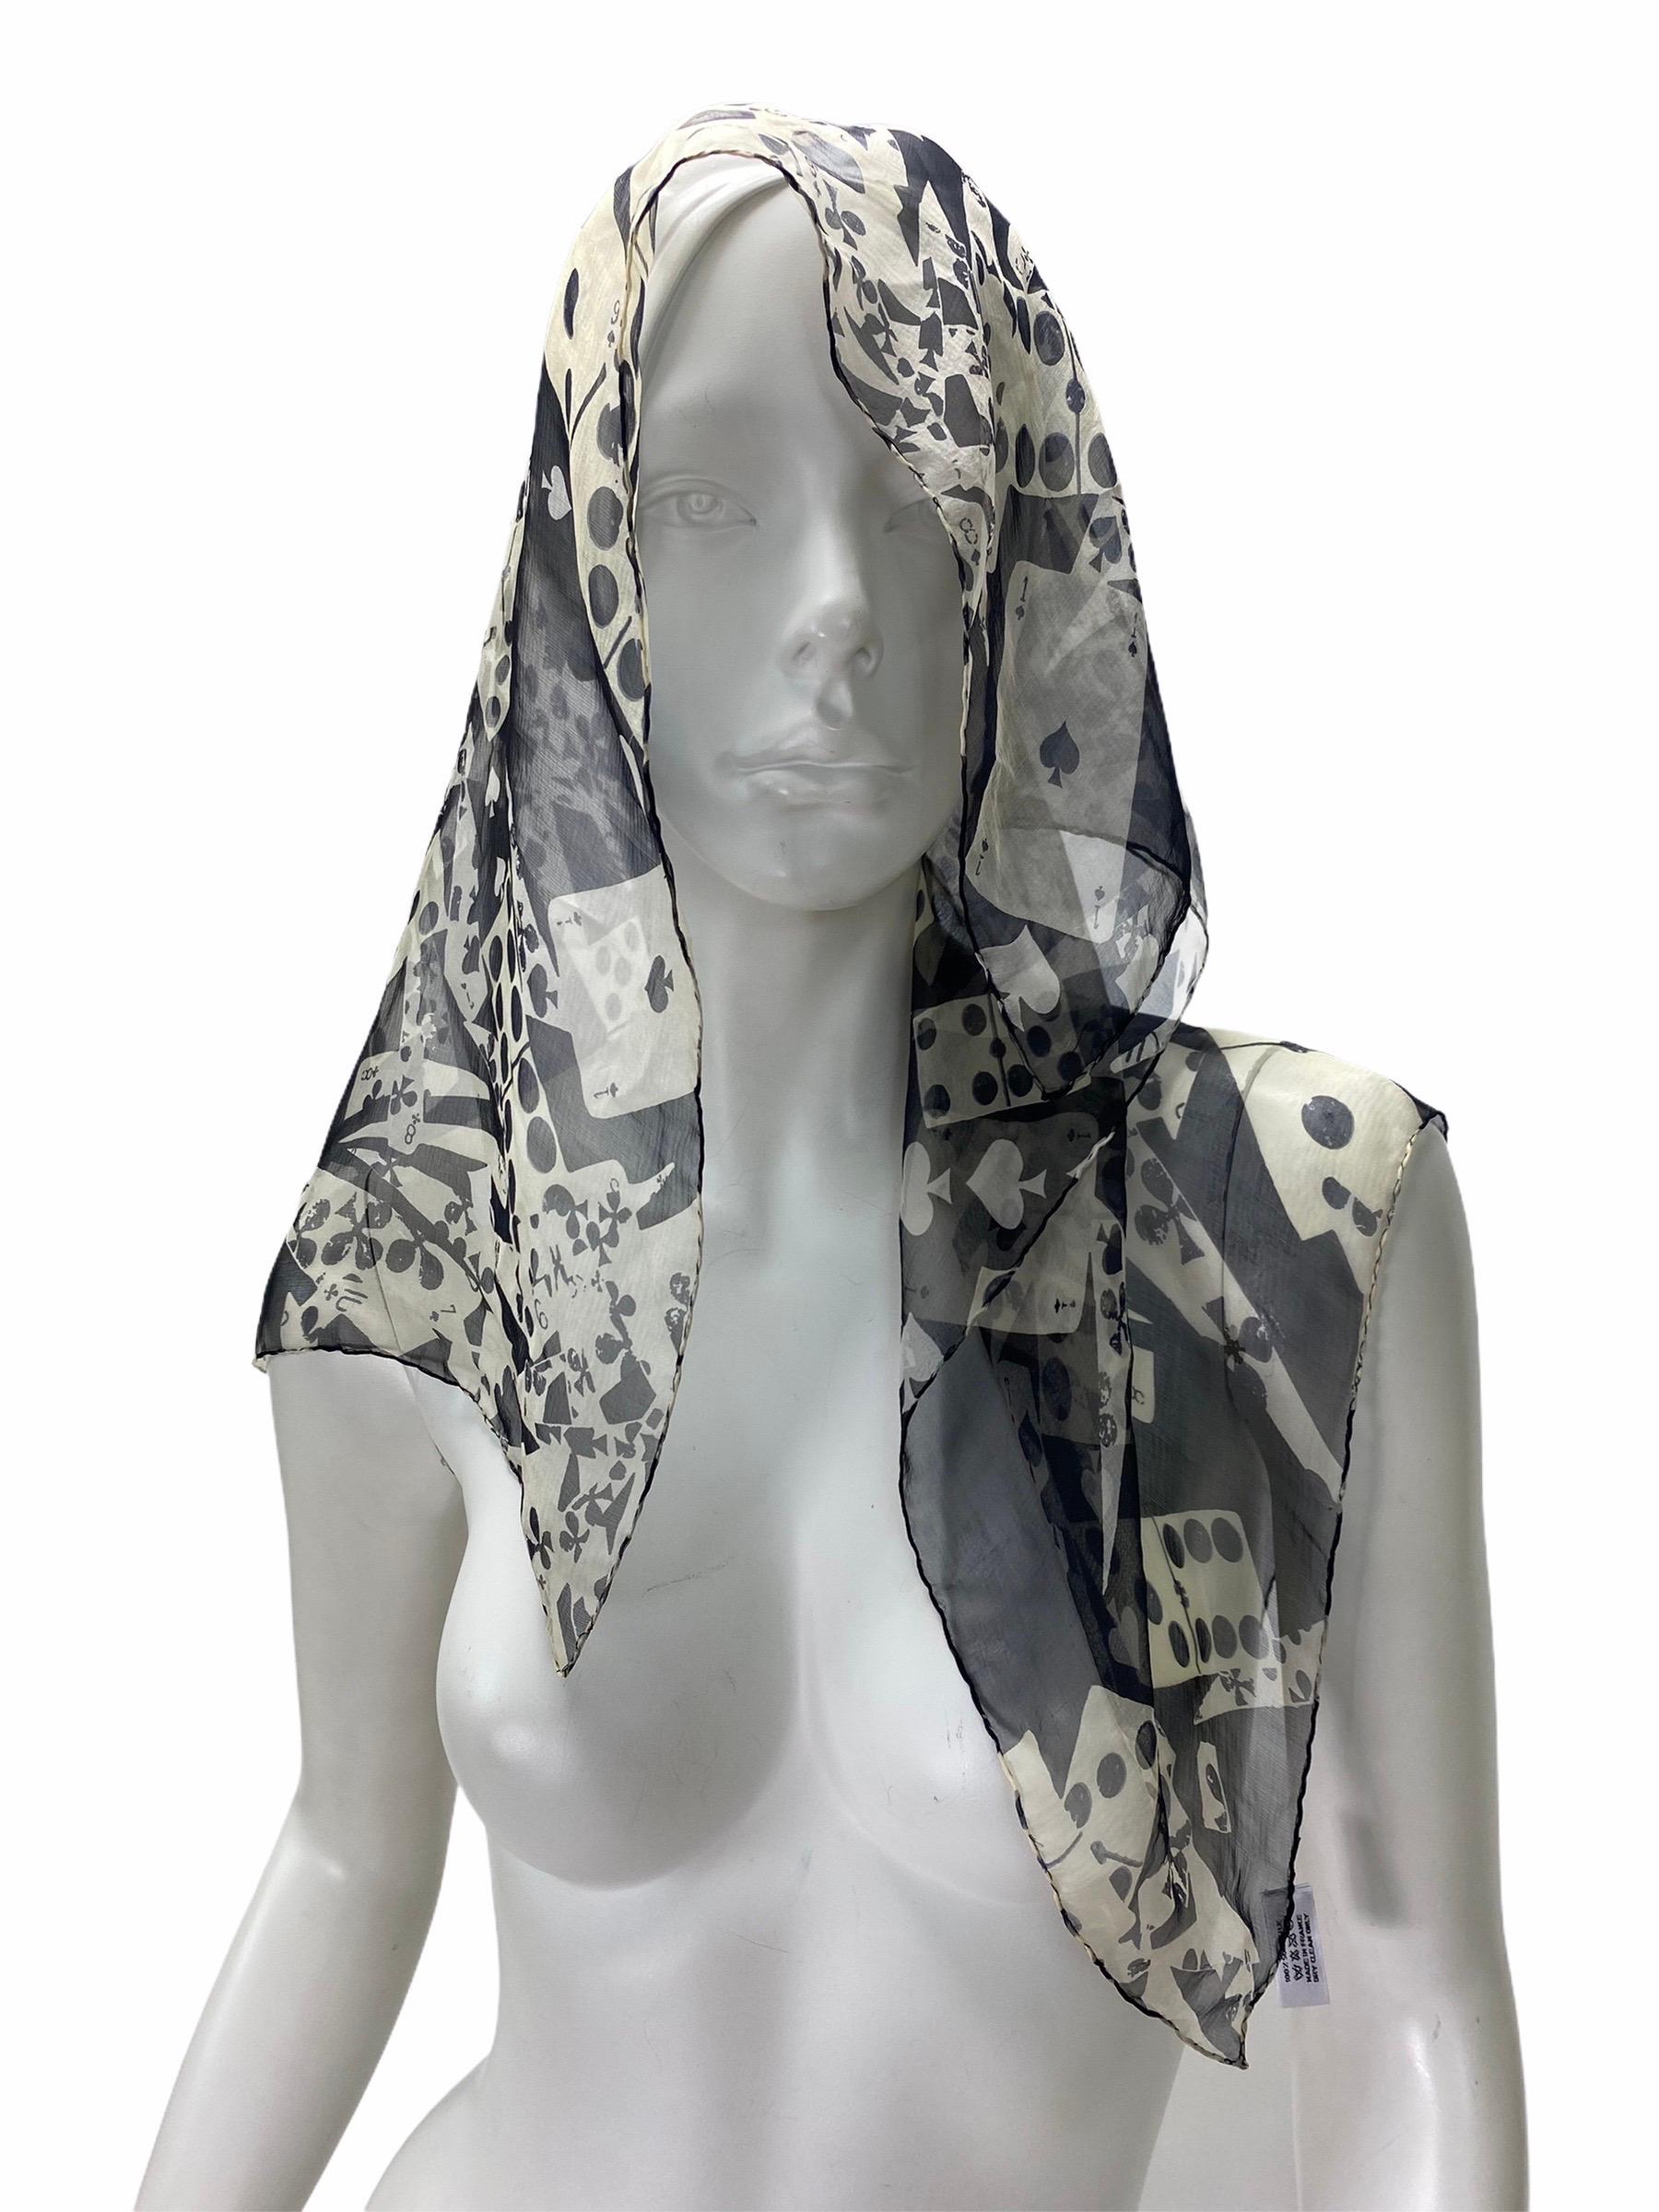 Rare Vintage John Galliano for Christian Dior Silk Scarf
F/W 2001 
100% Silk
Excellent condition
Highly collectible! 